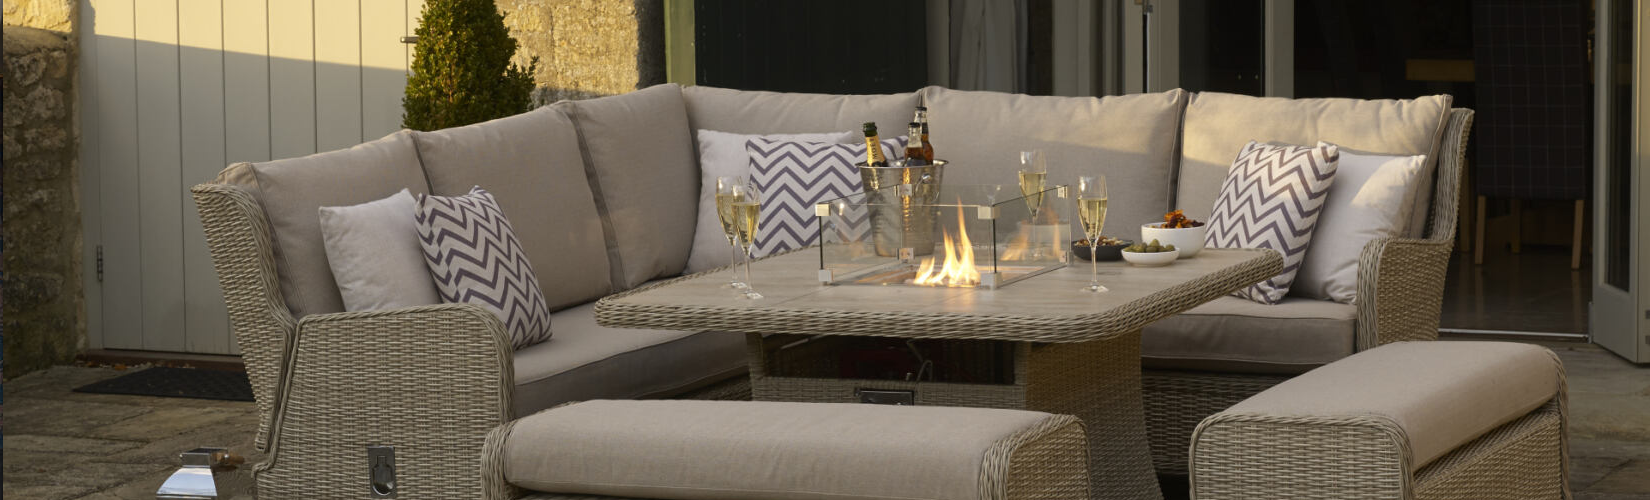 How to create an outdoor room in 6 simple steps.